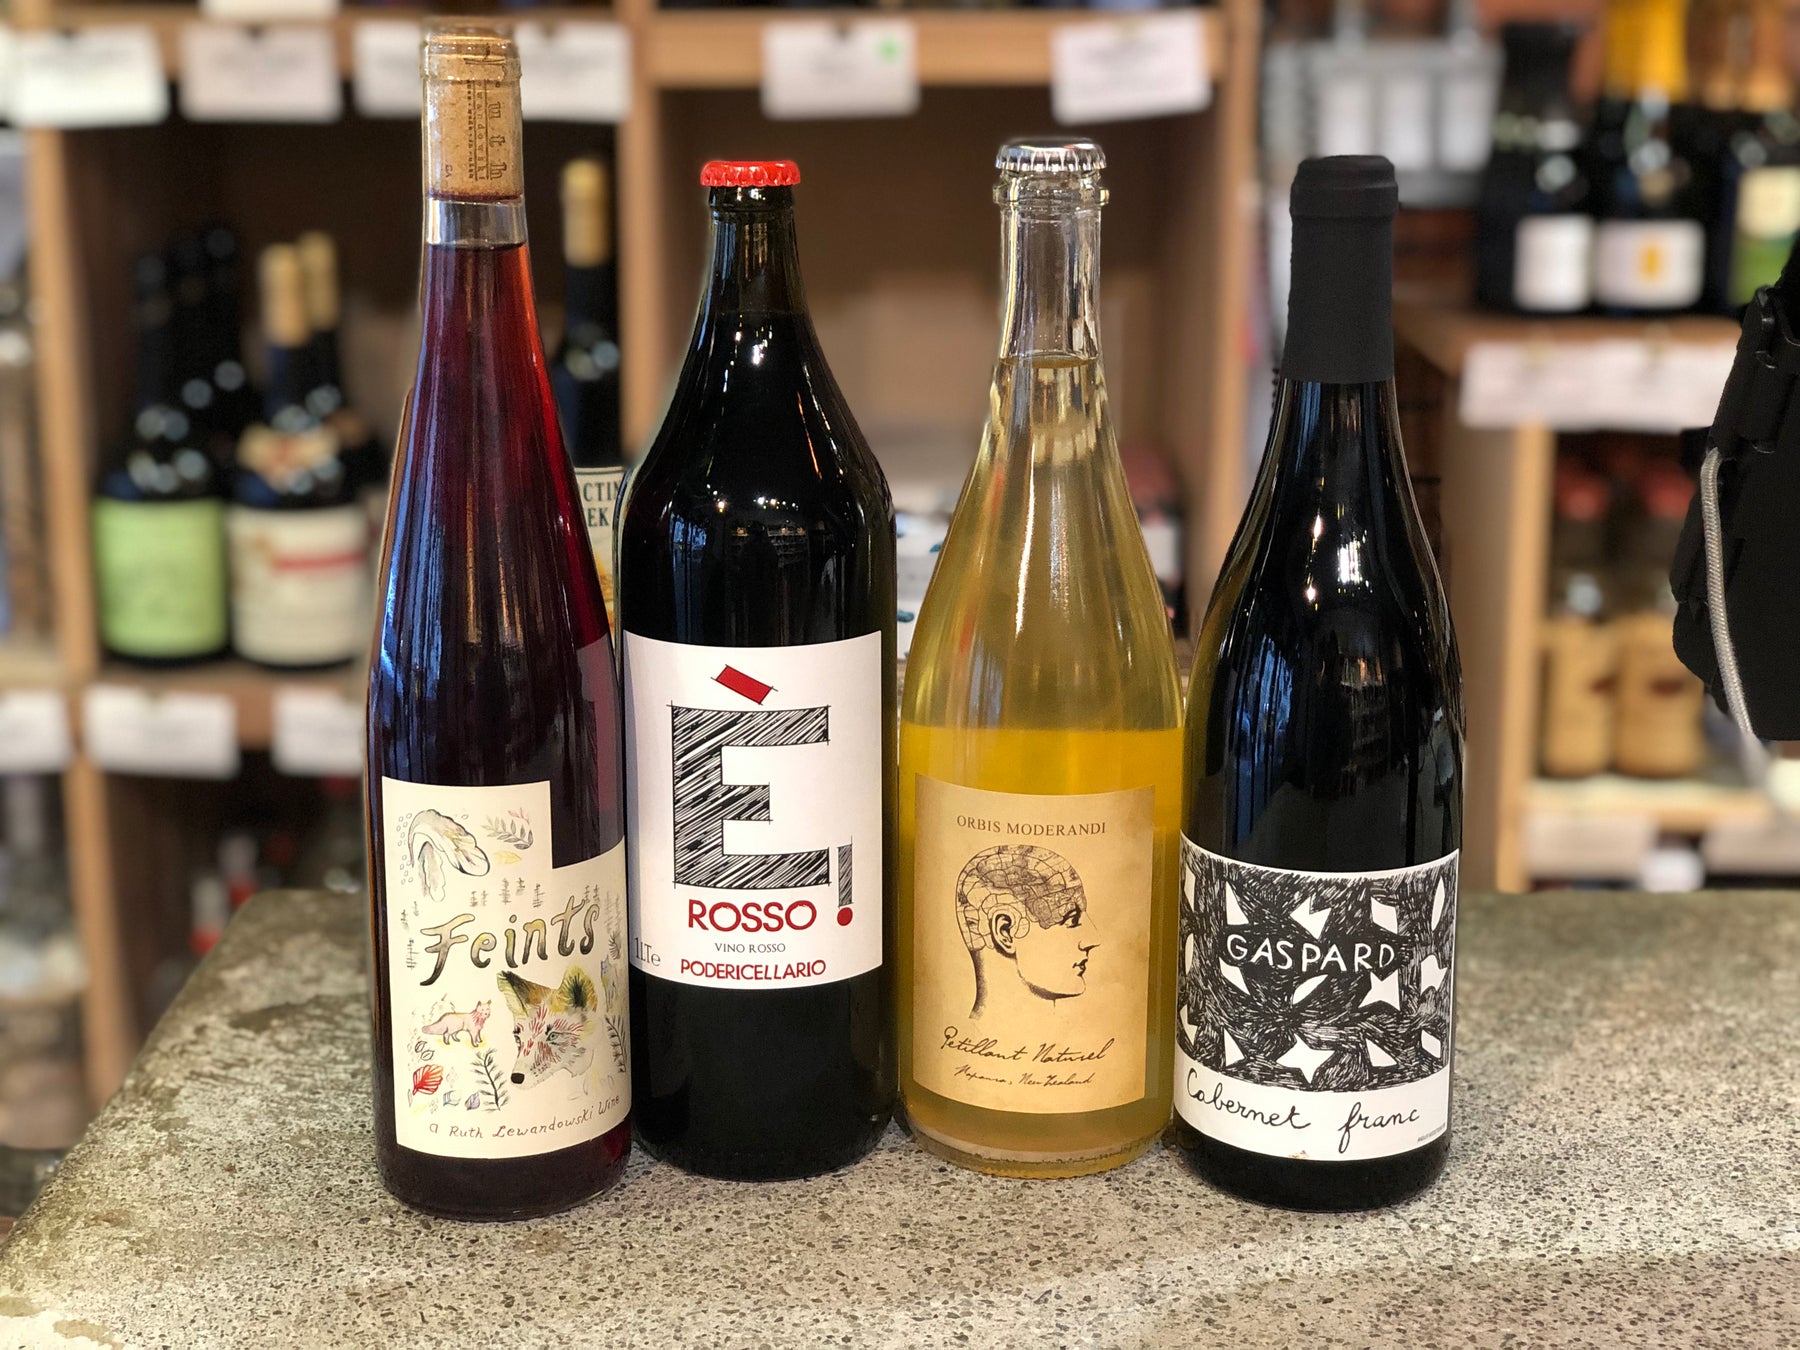 Fantastic Sale on Several Natural Wines Perfect for the Fall!